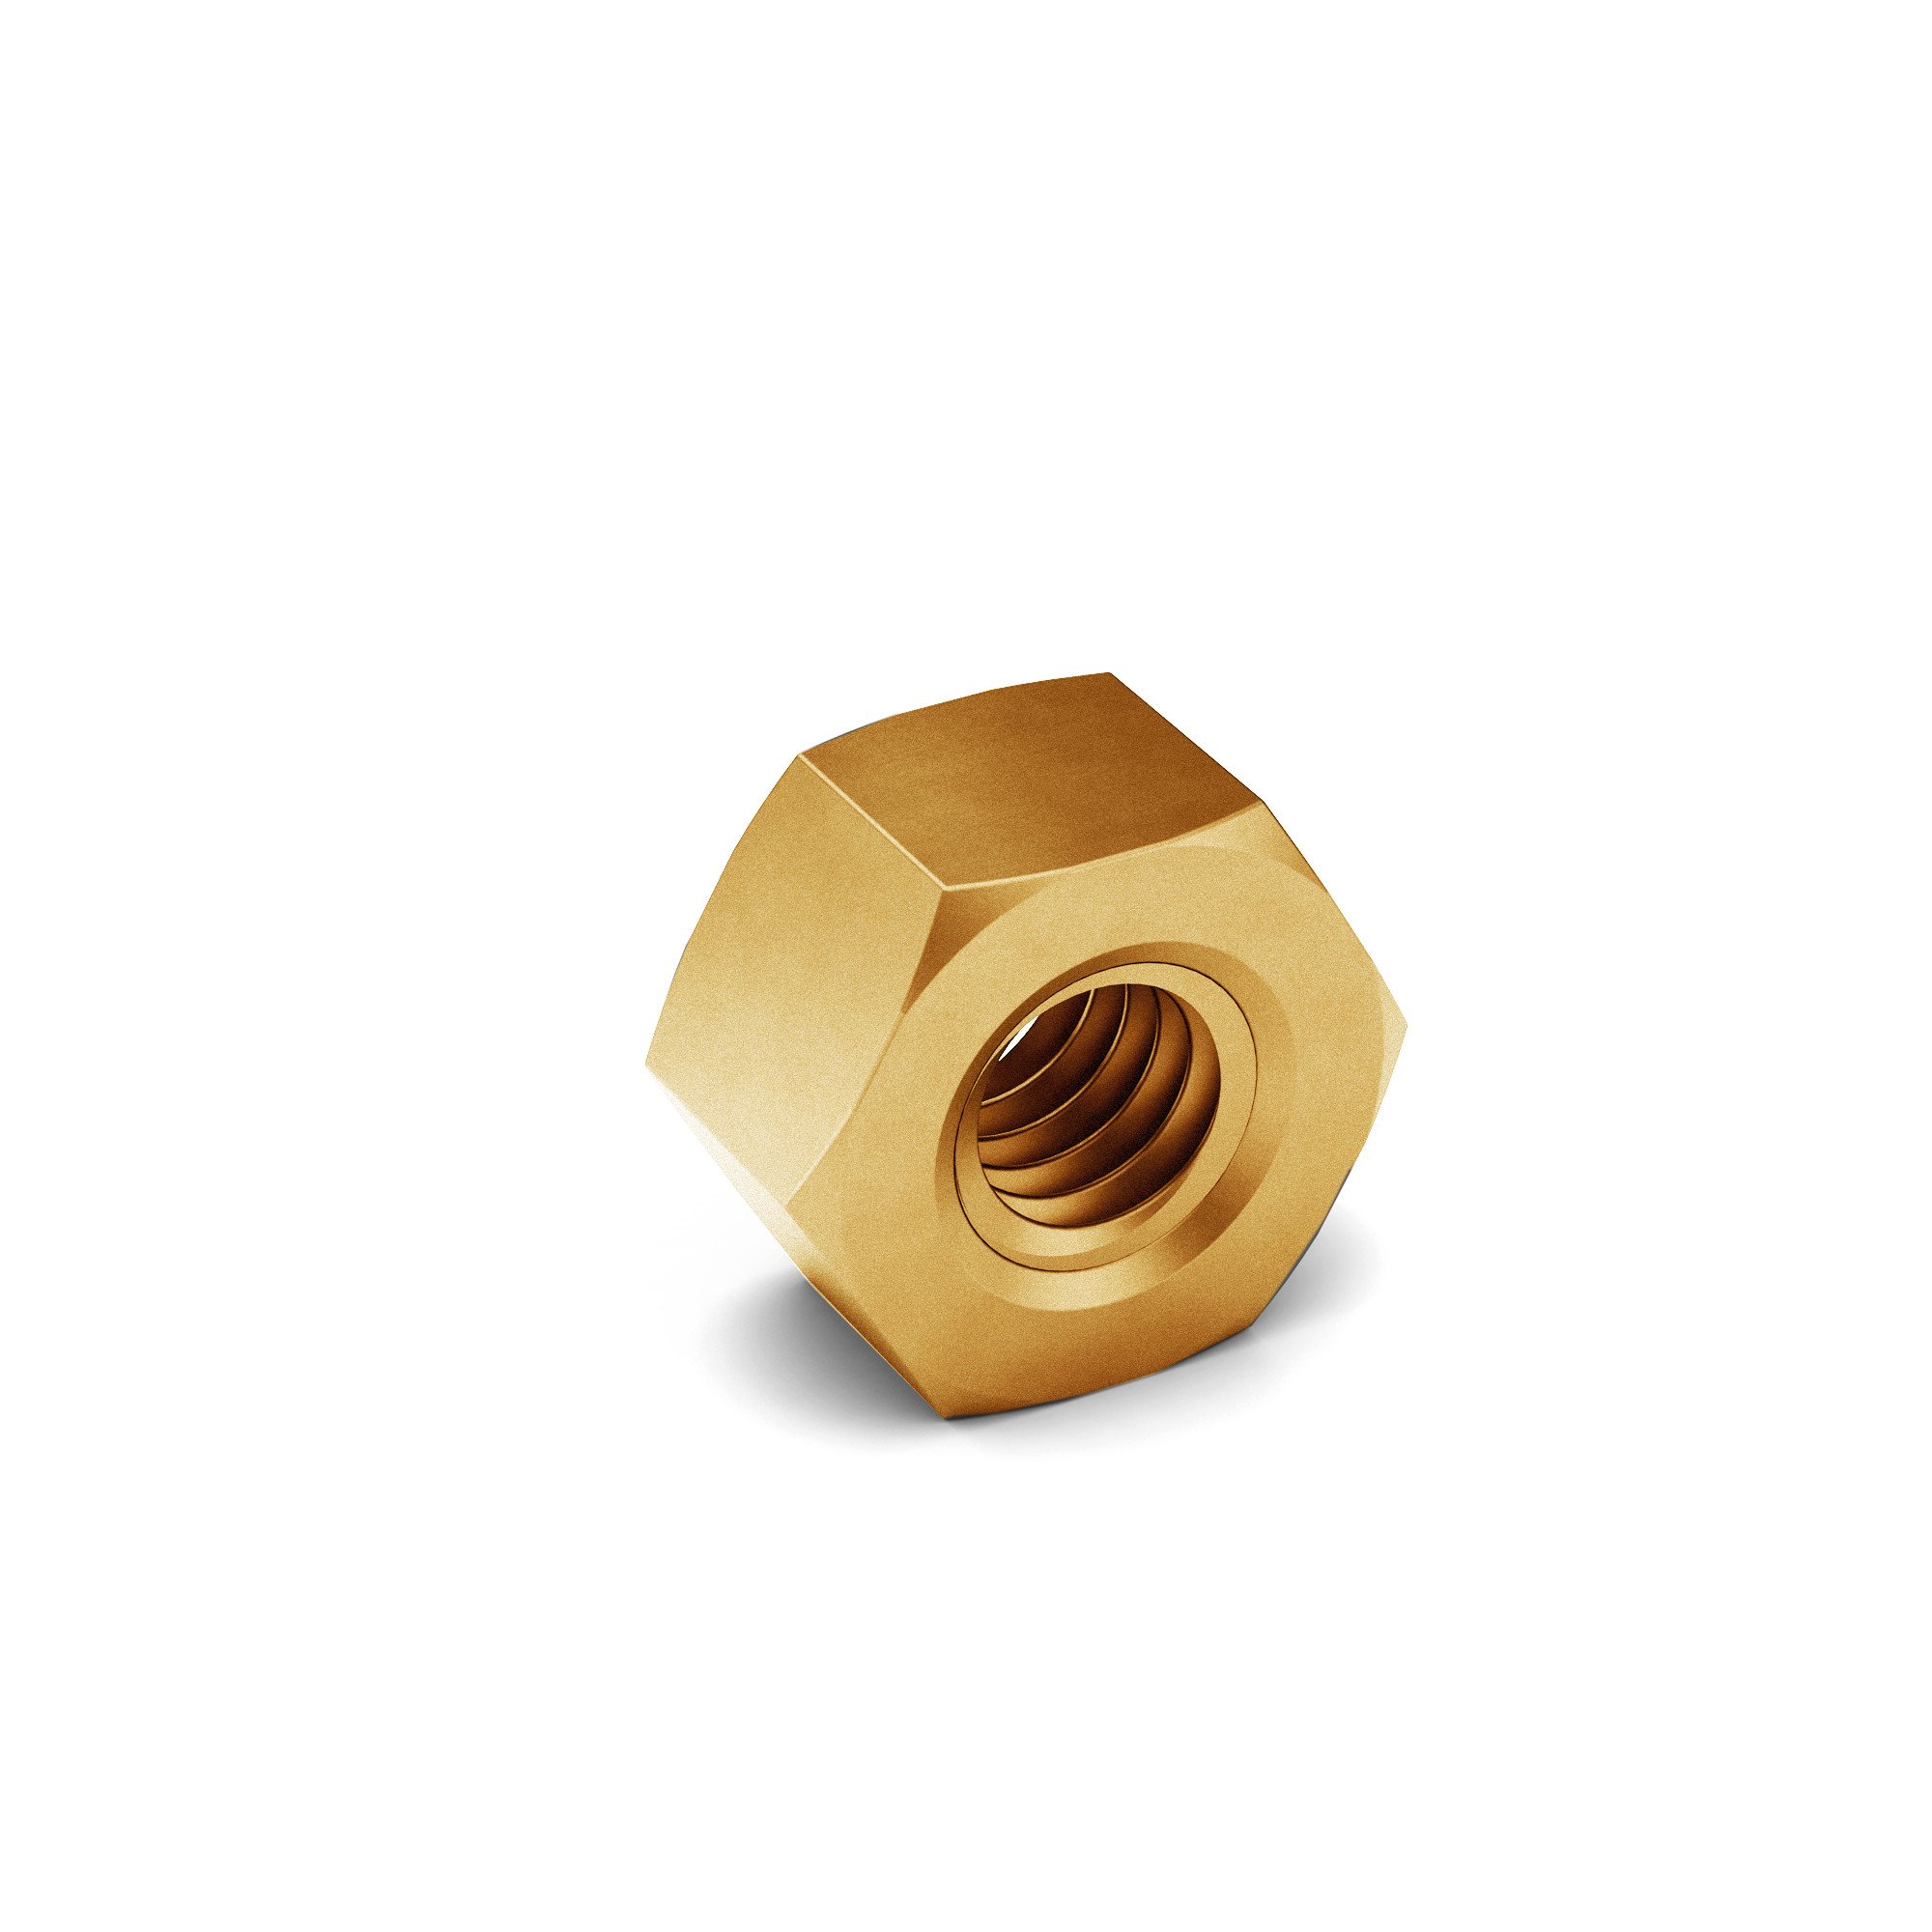 9/16-12 J995 GR 8 Hex Nut Zinc Yellow Made in USA